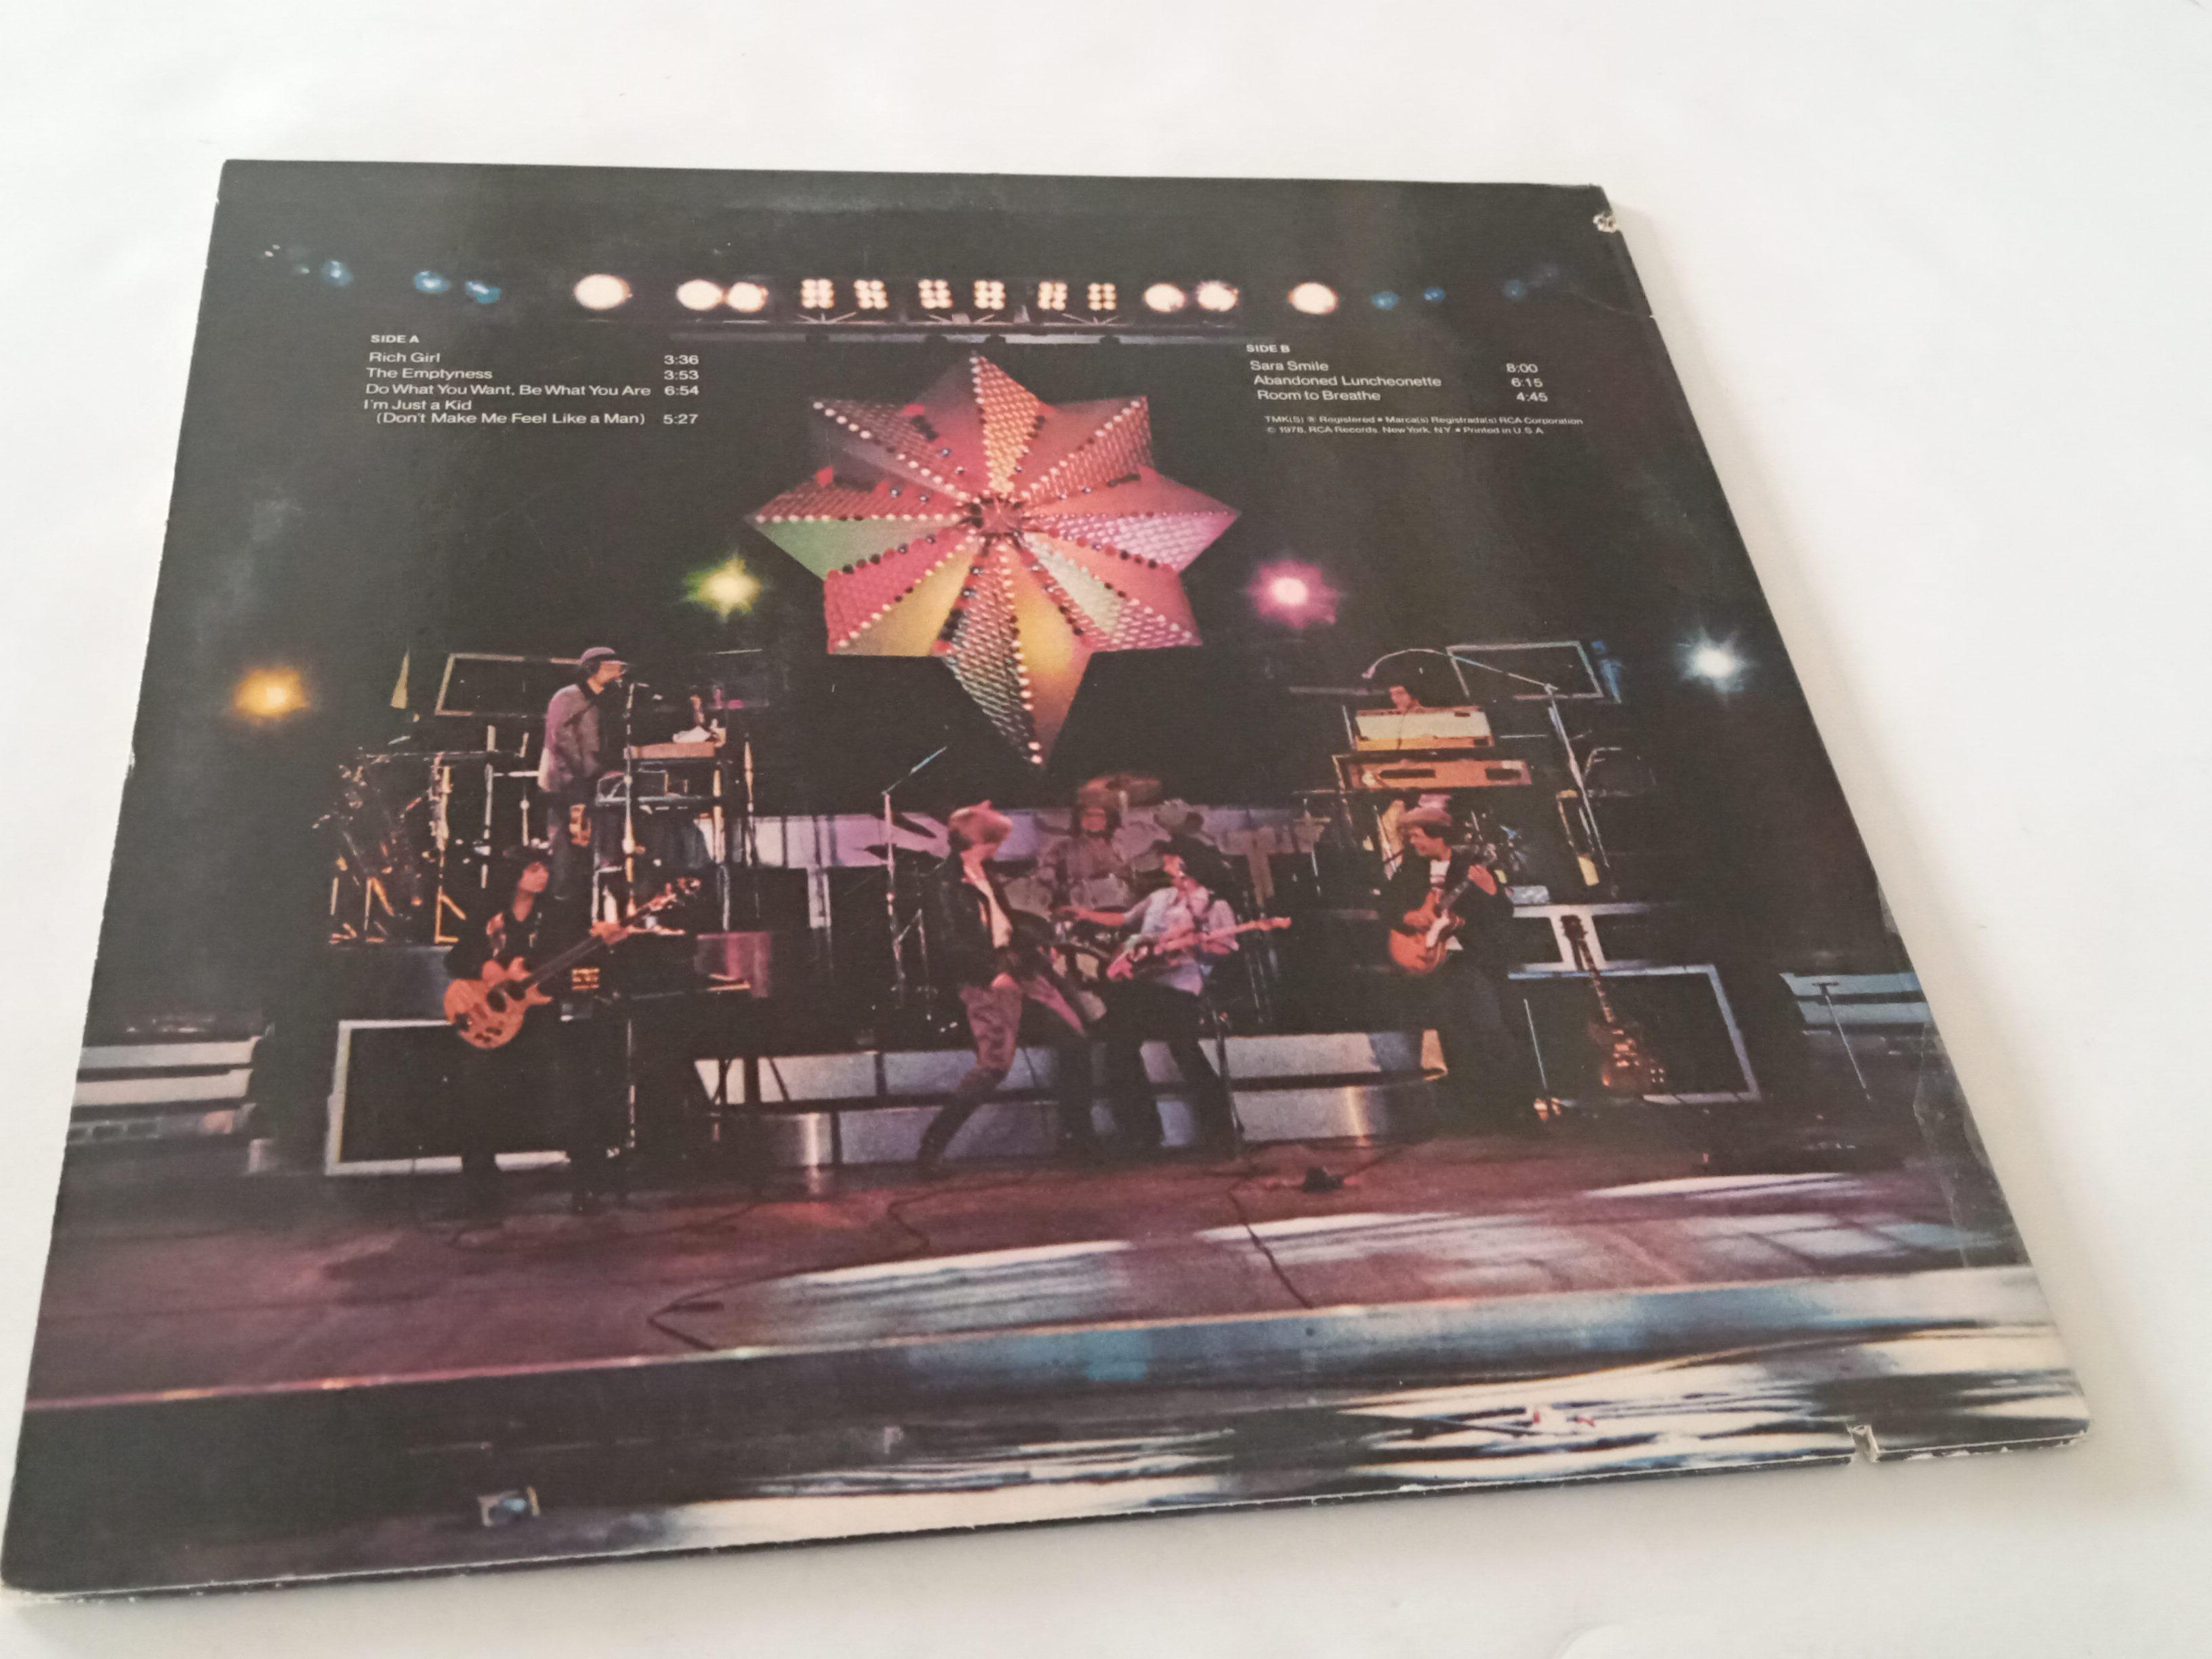 Daryl Hall and John Oates 'Live Time' LP signed with proof